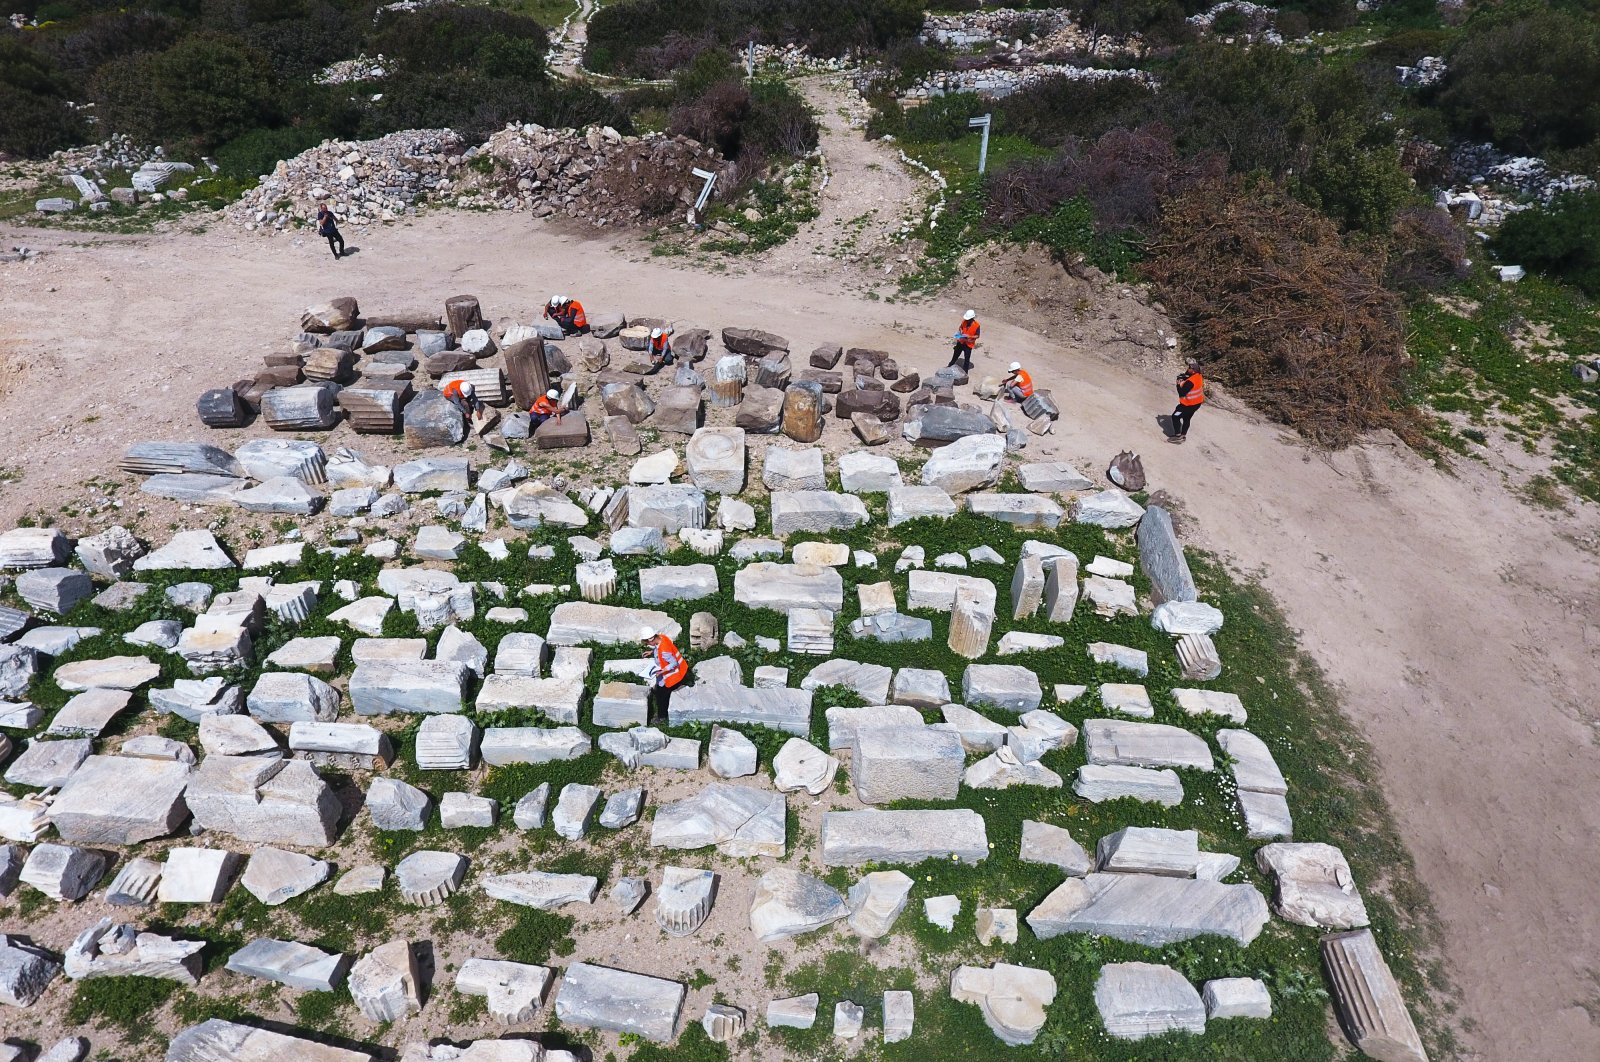 The new epigraphs found in the ancient city of Knidos, a site that harbors around 3,000 years of history in the Aegean province of Muğla province, Turkey, April 12, 2022. (AA Photo)